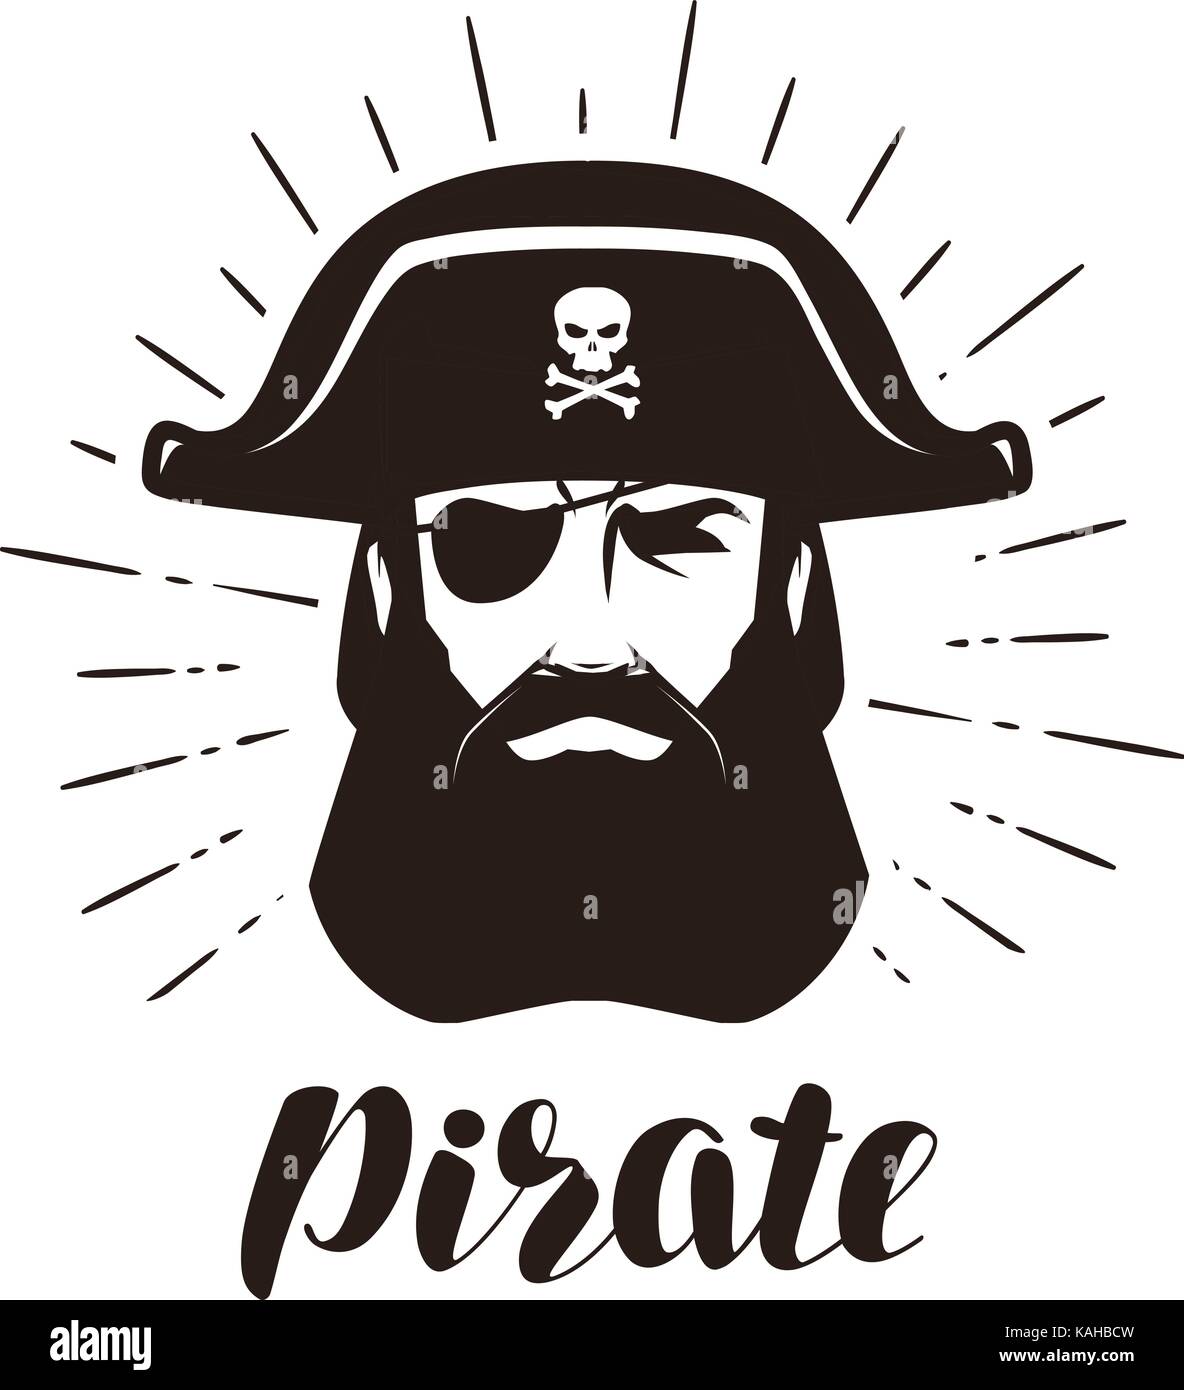 Pirate logo or label. Portrait of bearded one-eyed filibuster in hat. Vector illustration Stock Vector